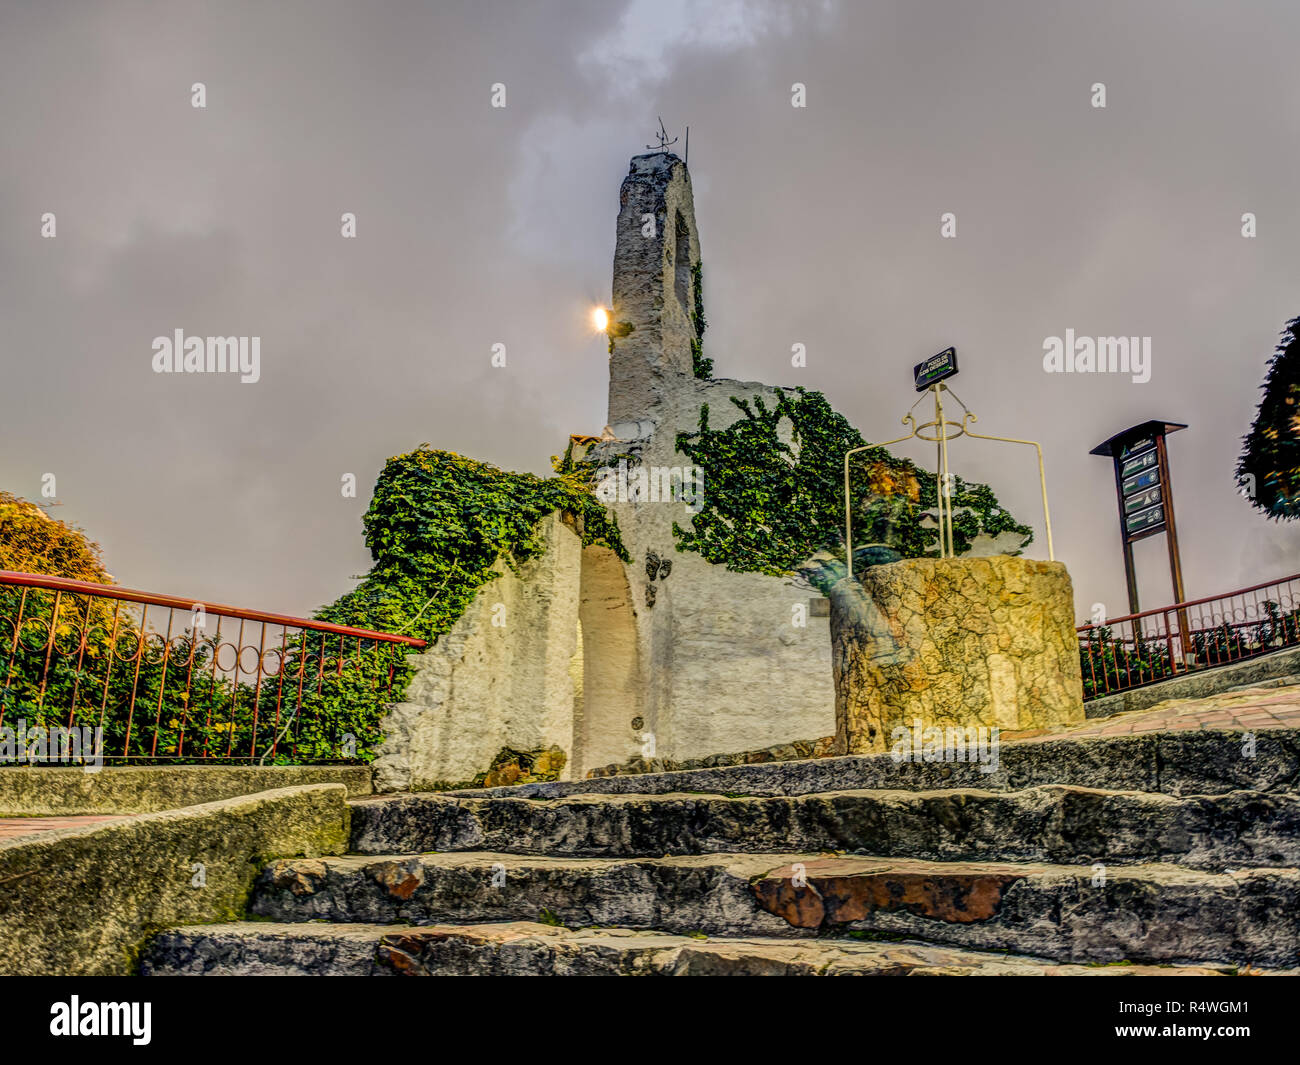 Bogota, Colombia - April 29, 2016: A small bell tower from old church that was destroyed during earthquake on the Monserrate Bogota hill. Latin Americ Stock Photo